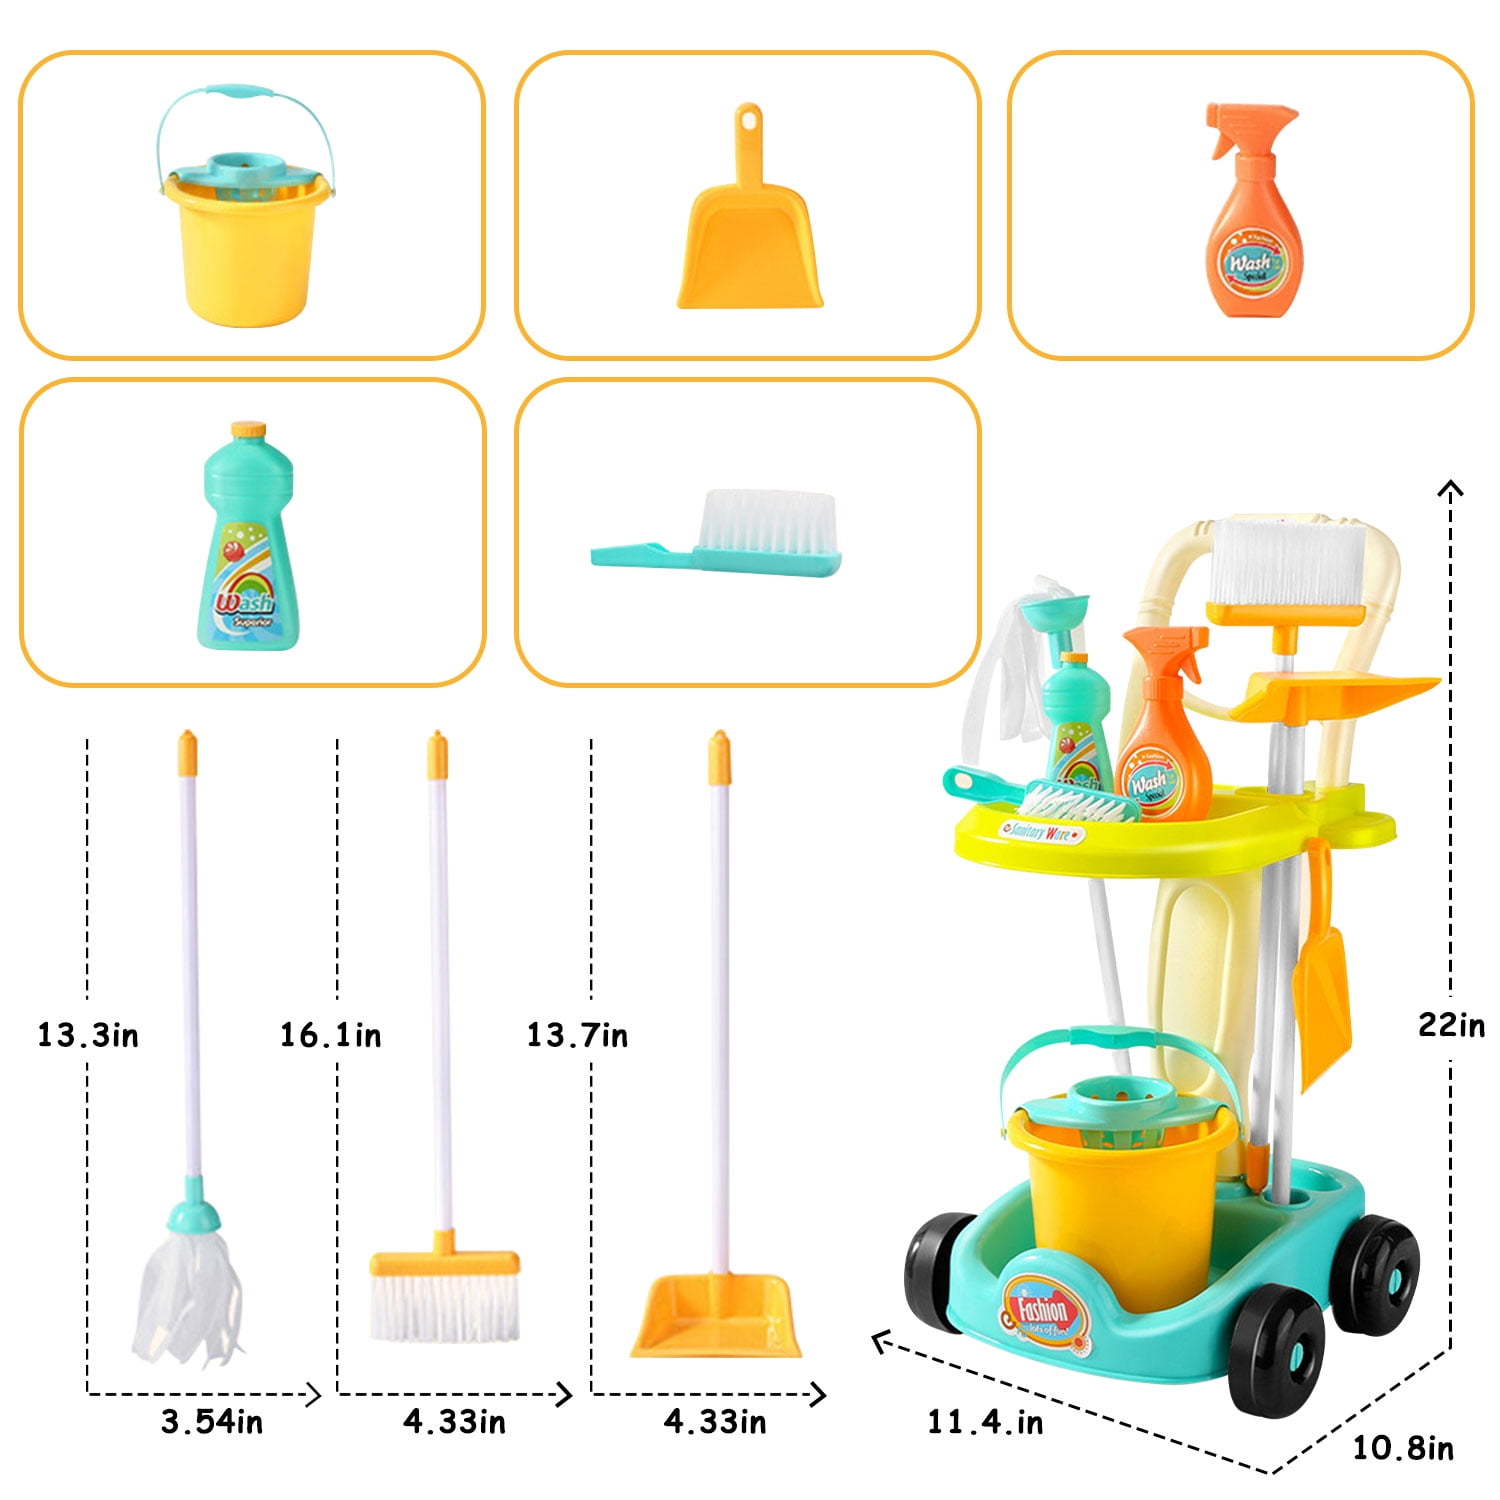  HOMSFOU Toy Mop Cleaning Tool Mop Model Hand Mop Toy Broom and  Mop for Toddlers 1-3 Mop and Broom in Toys Educational Mop Toy Kids Mop  Cleaning Toys Kids Suit Supplies